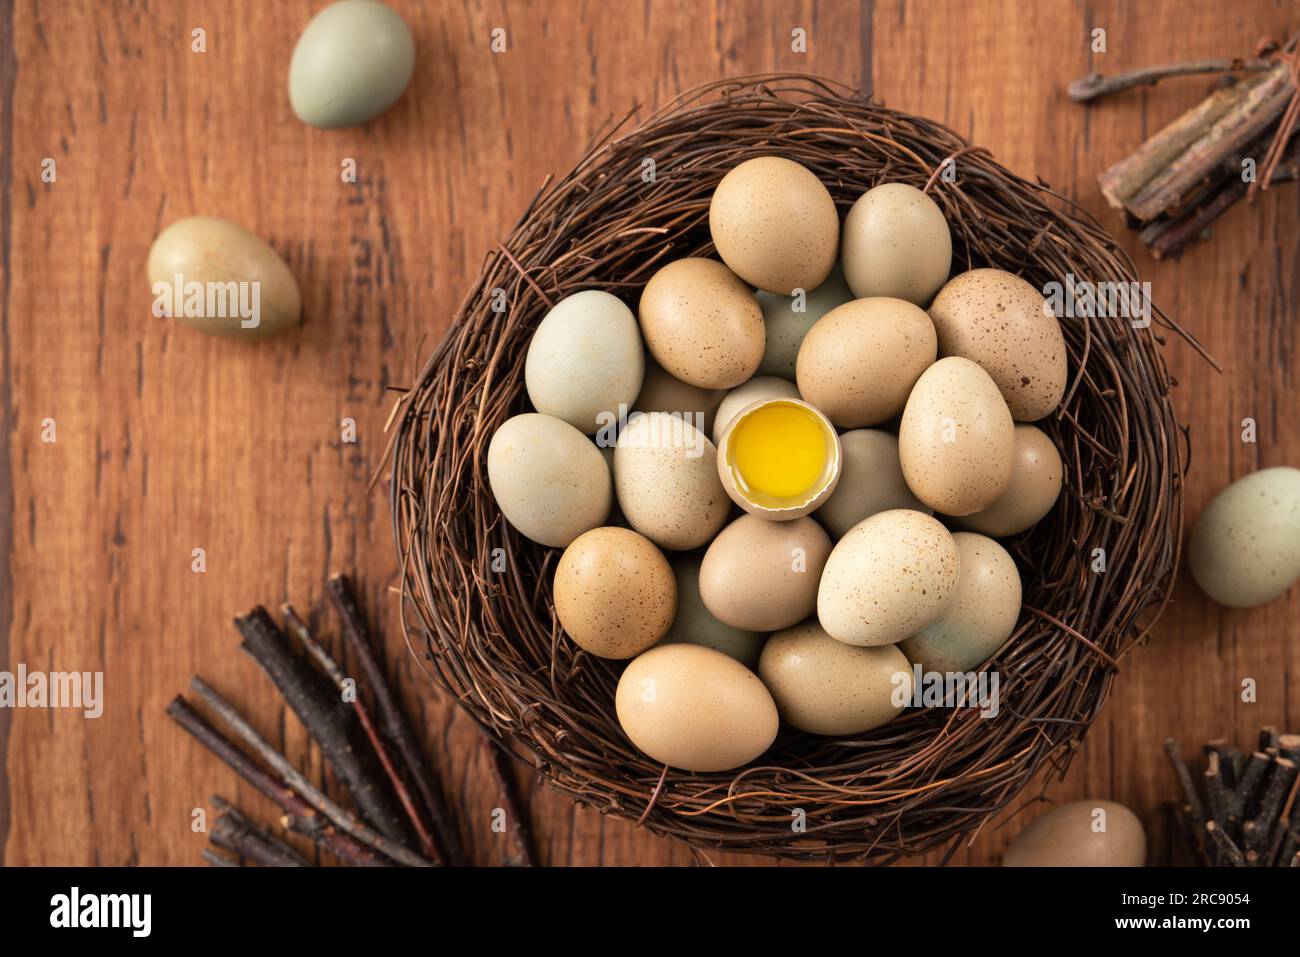 Top view of fresh button quail eggs in a nest on wooden table background. Stock Photo